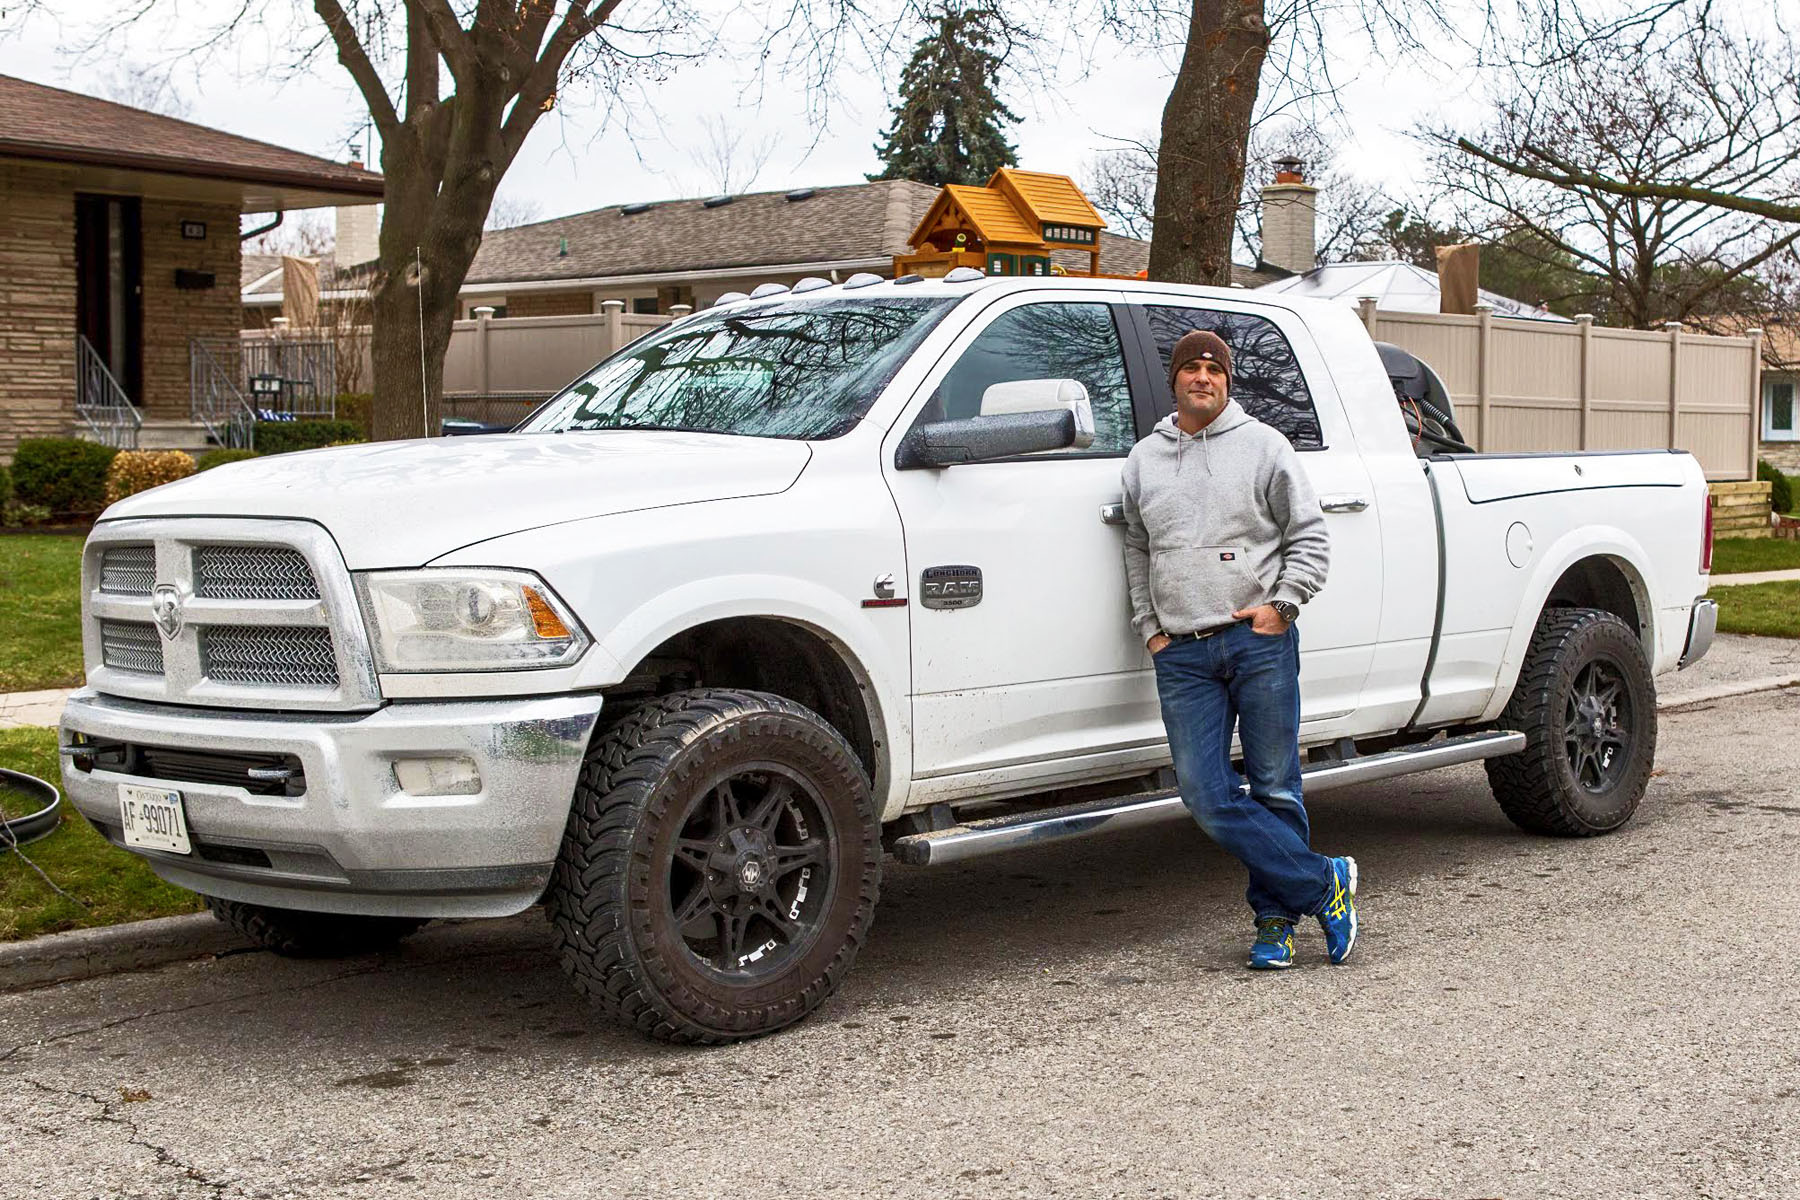 Now for some Canadian content. Home-renovation expert and Gemini-award winner Bryan Baeumler has spoken to autoTRADER.ca regarding his love for his Ram 3500. "Since I was a little kid," he said. "Dodge had the look." It's not just puppy love though, or a statement of strength, his truck is also of much practical use. In addition to being a TV host, Baeumler also runs his own construction outfit, which of course demands a large vehicle.